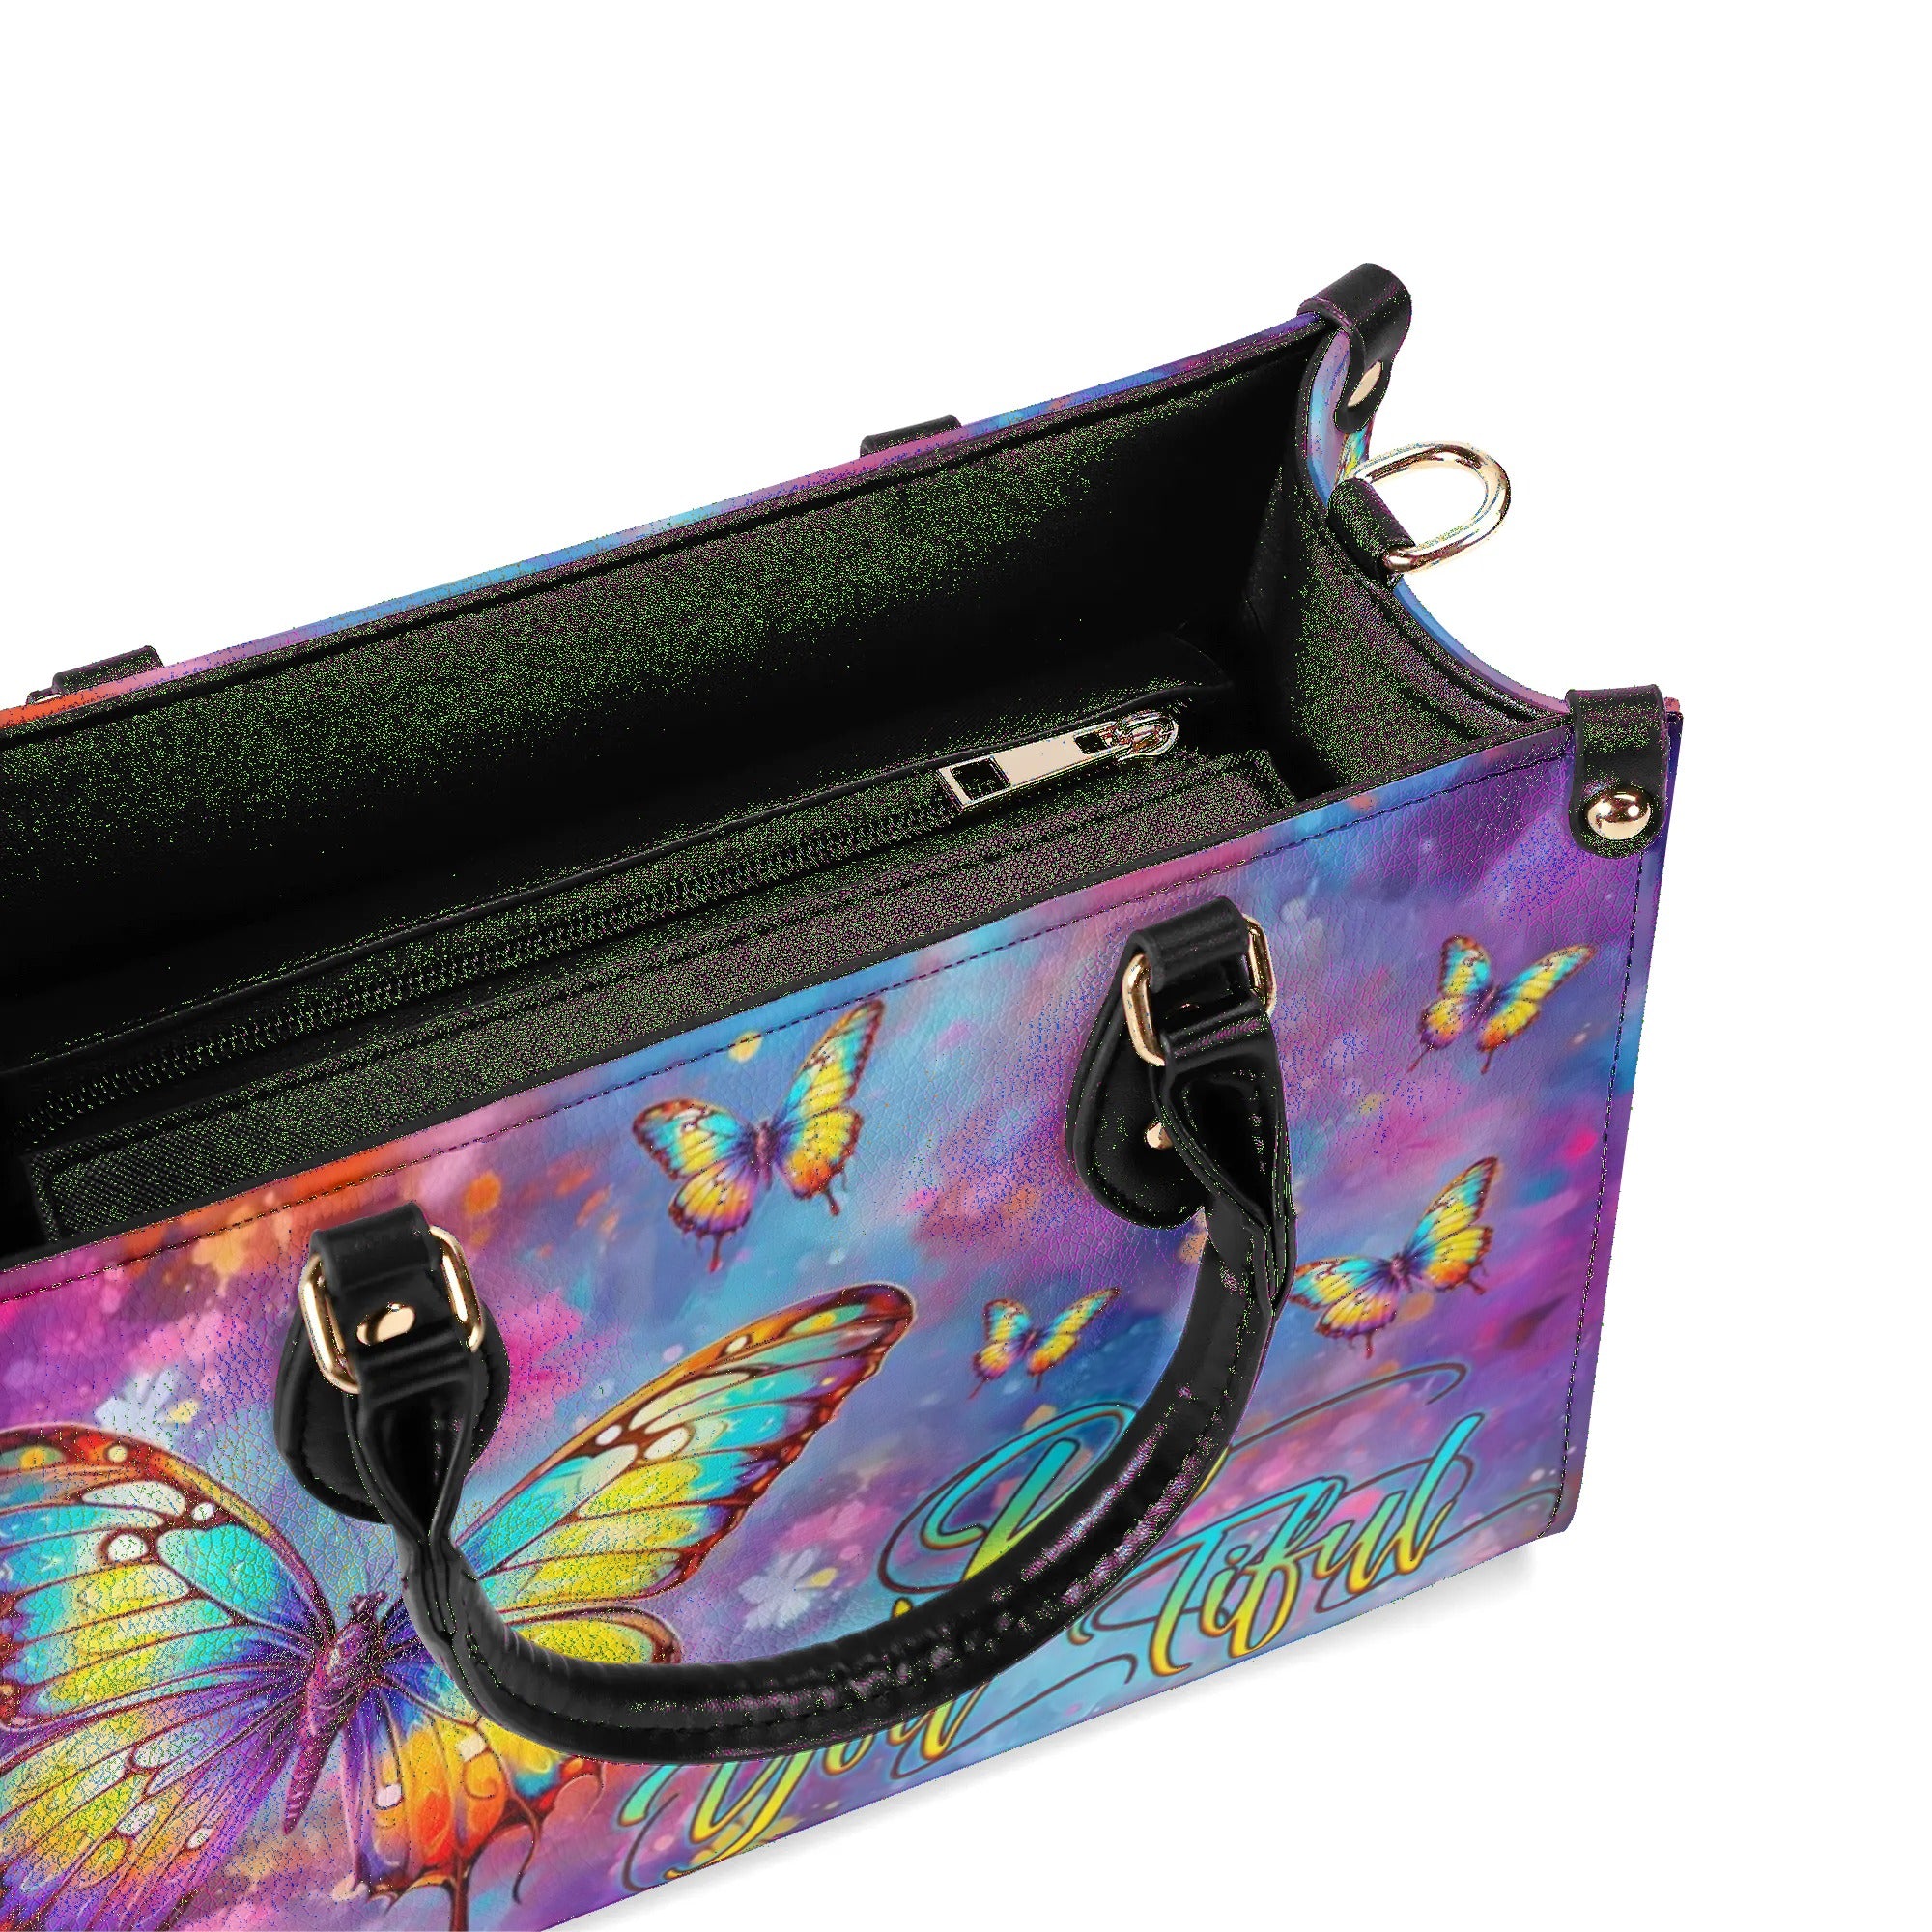 BE YOU TIFUL BUTTERFLY LEATHER HANDBAG - TLNZ1206244